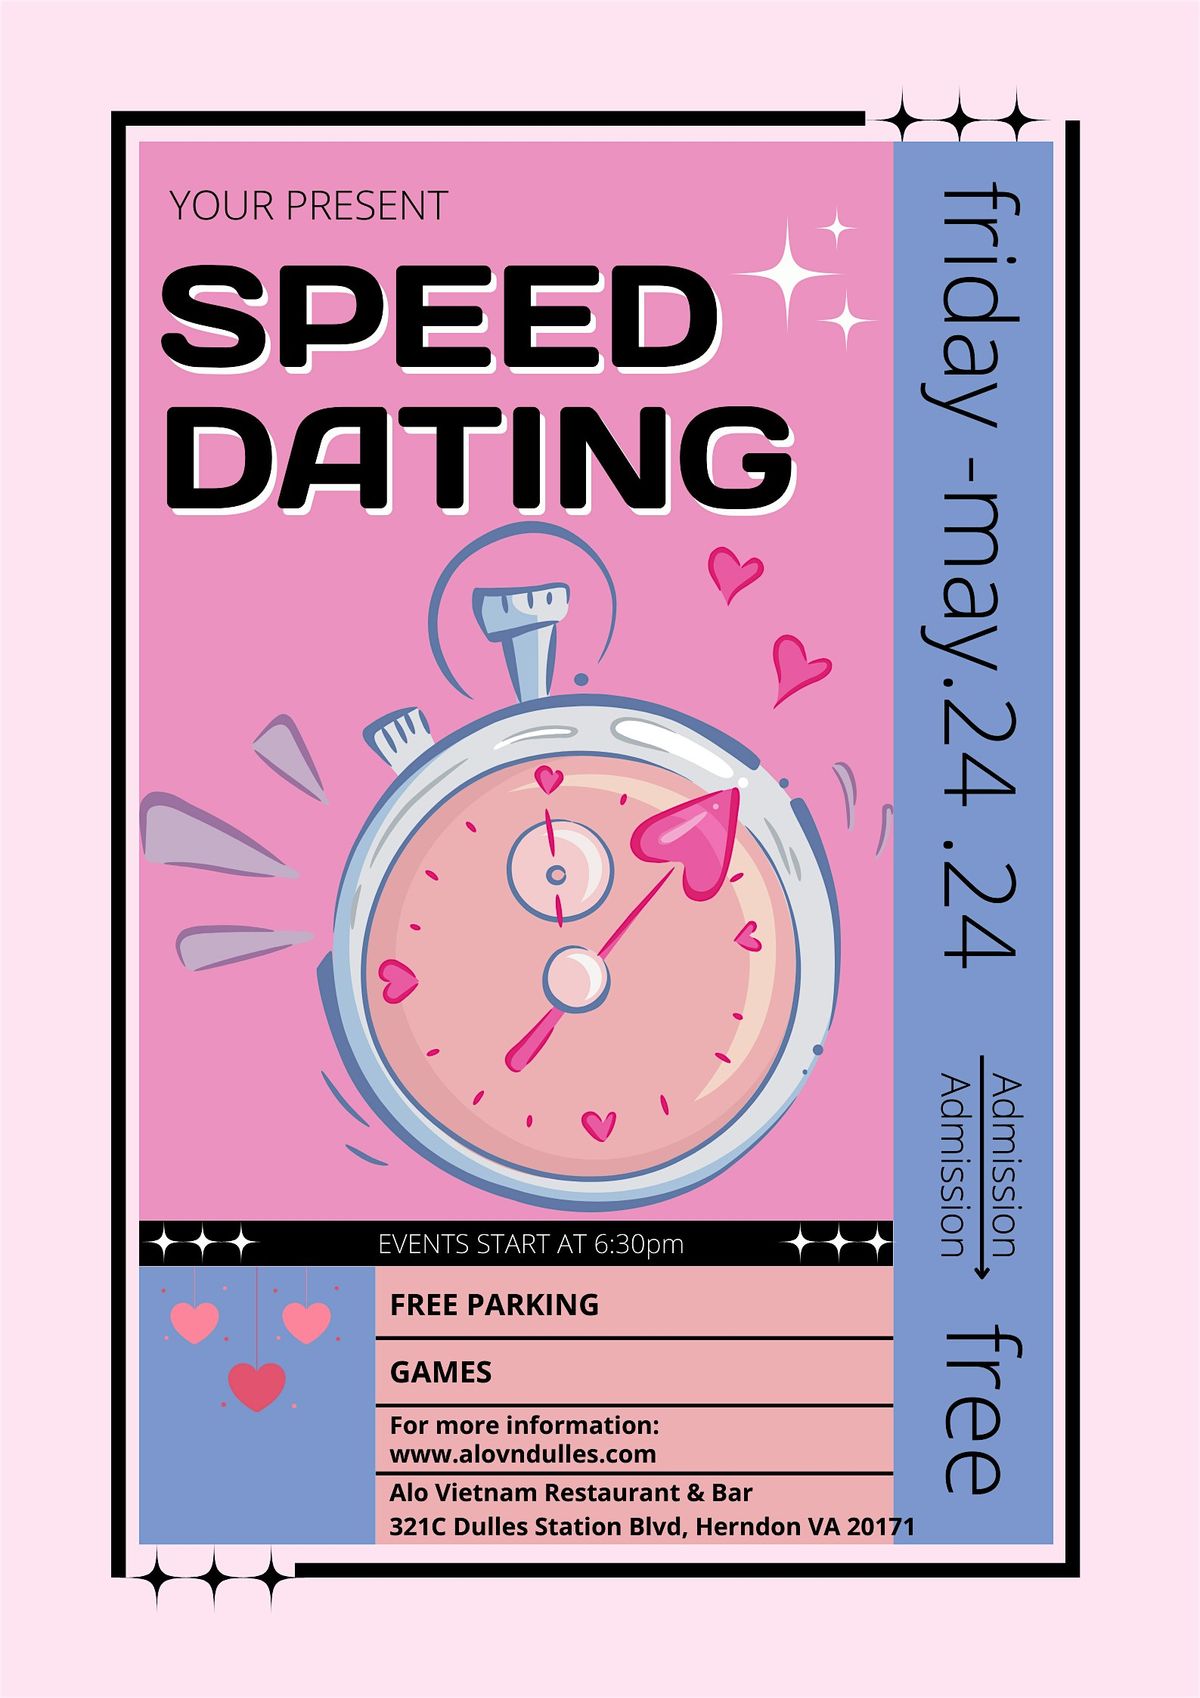 Speed dating | Singles event | Free admission